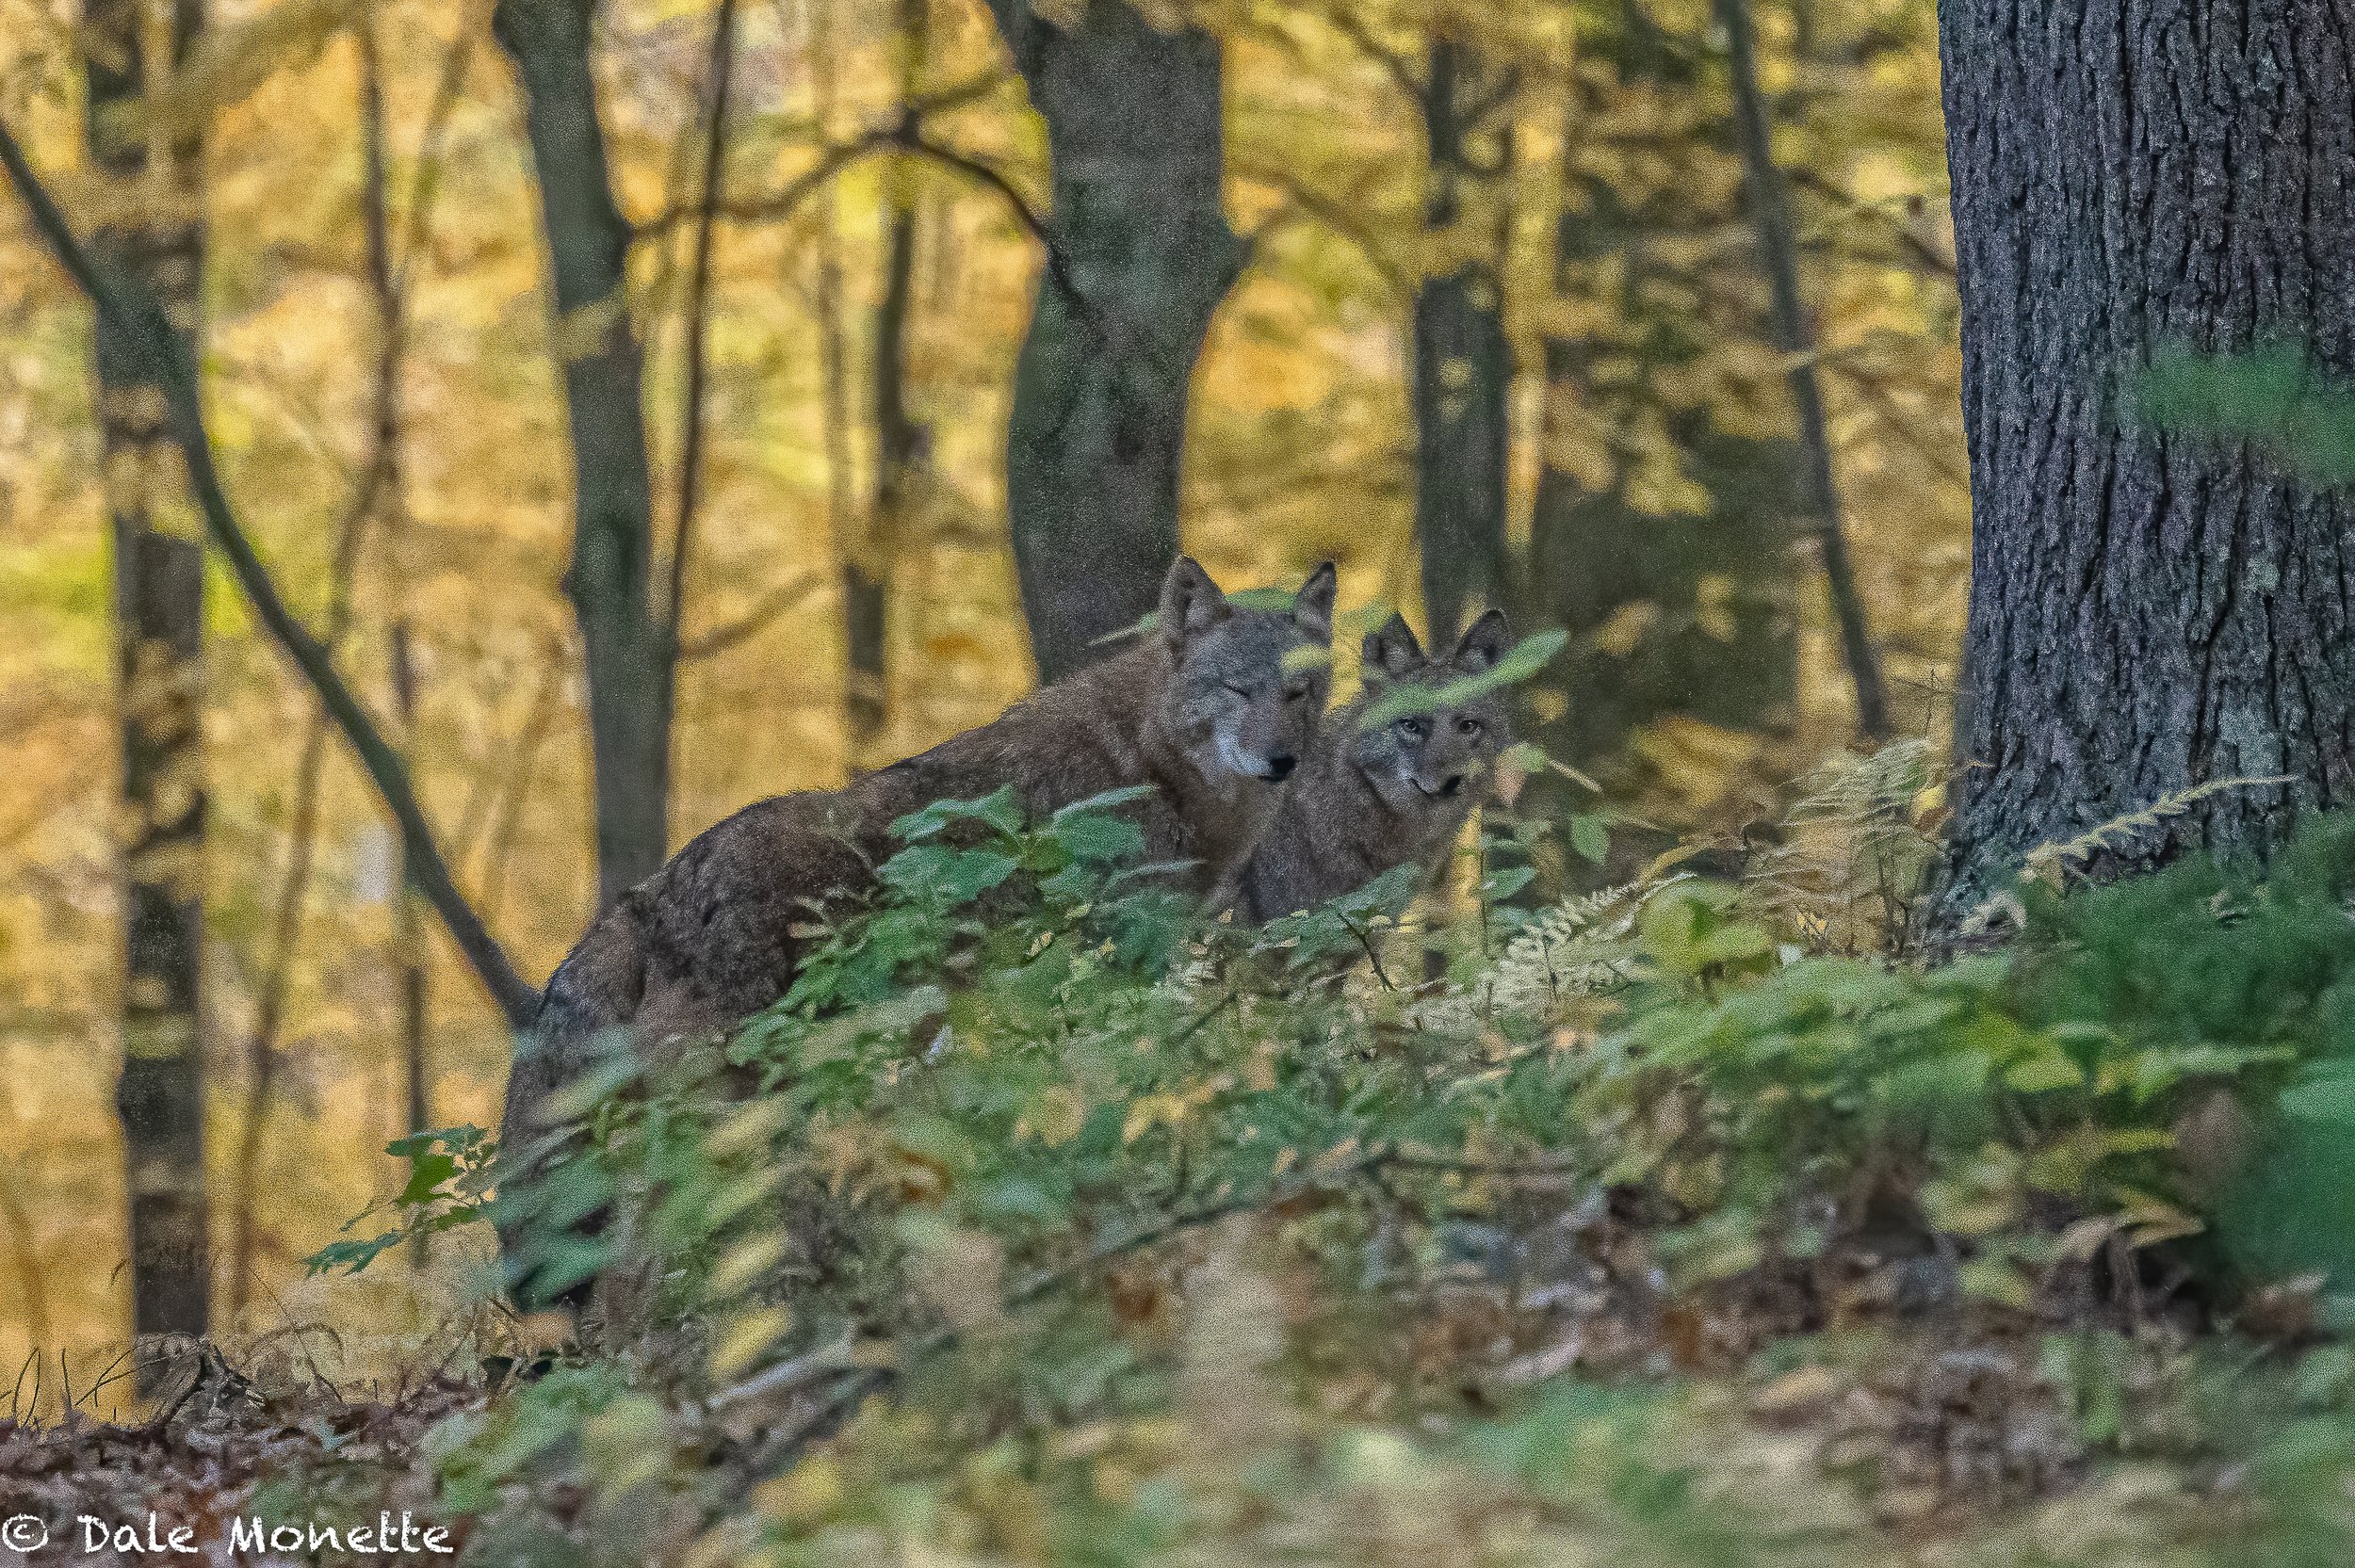   I found a pair of coyotes who were interested in what I was, when they figured it out, they ran off into the woods. ISO on my camera was 3200 as it was very dark.  